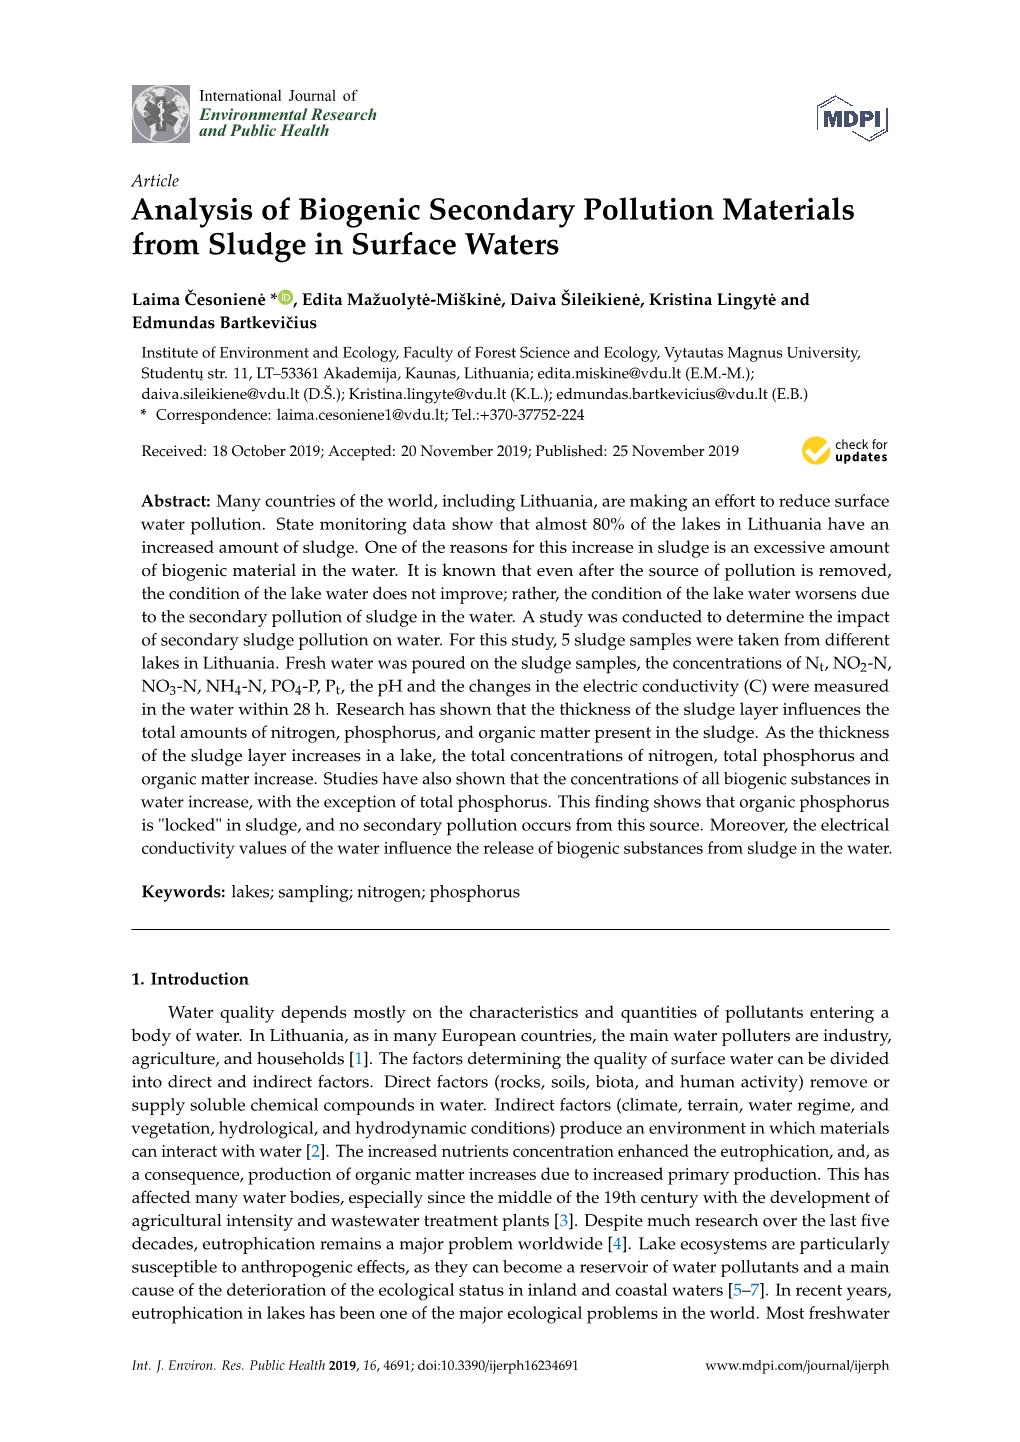 Analysis of Biogenic Secondary Pollution Materials from Sludge in Surface Waters